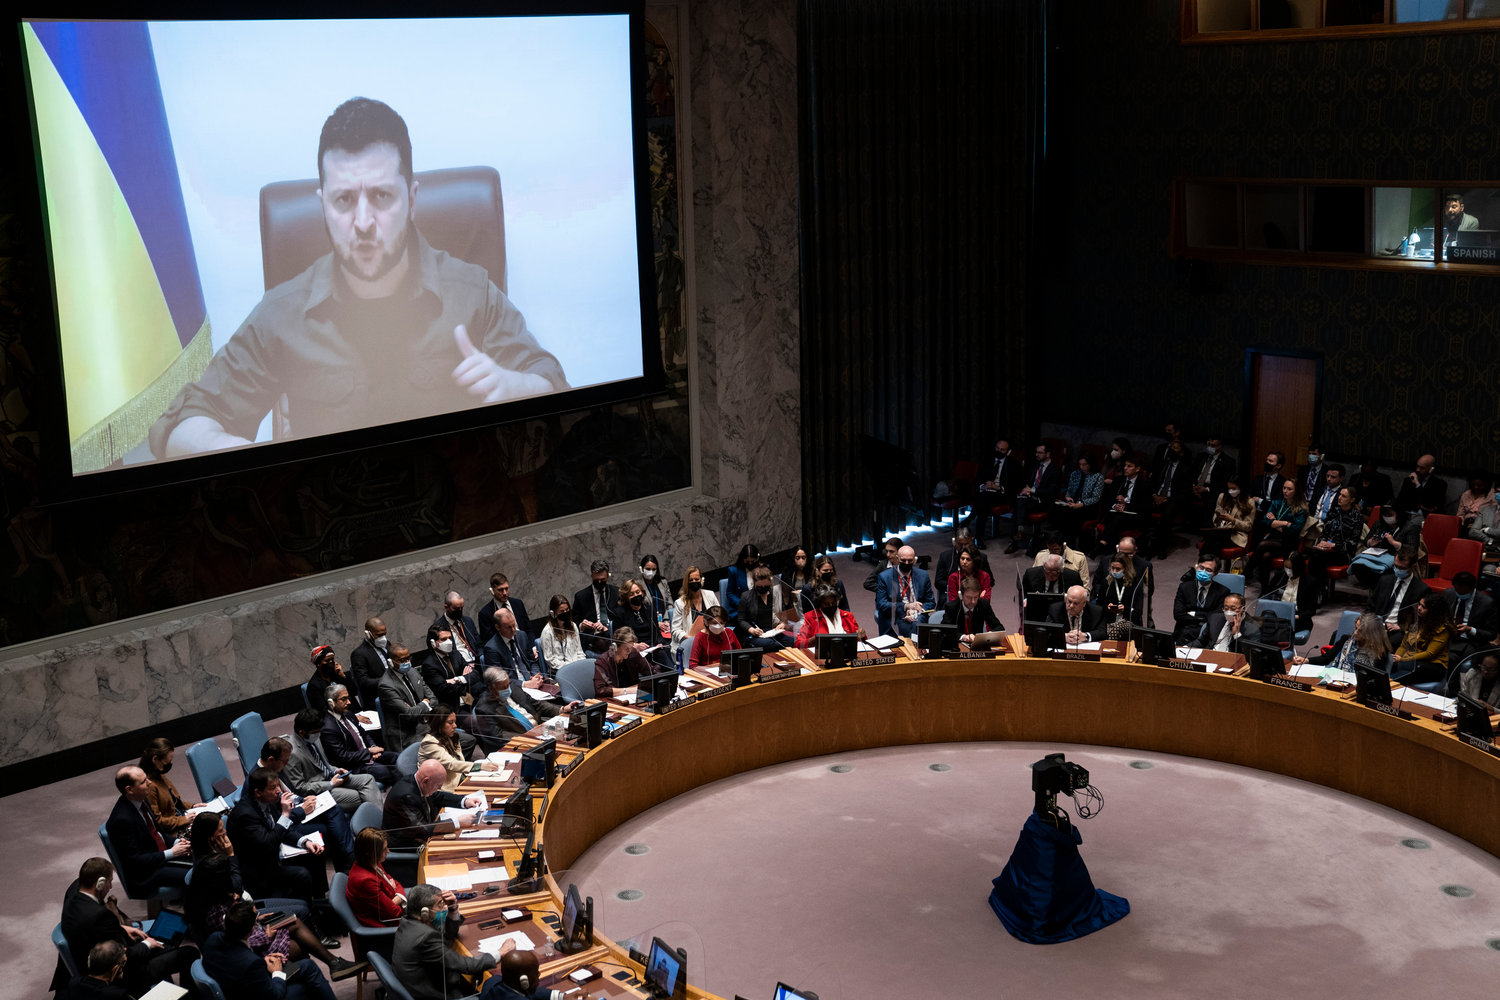 HONORARY DEGREE — Ukrainian President Volodymyr Zelenskyy speaks via remote feed during a meeting of the UN Security Council, in this file photo from Tuesday, April 5, at United Nations headquarters.